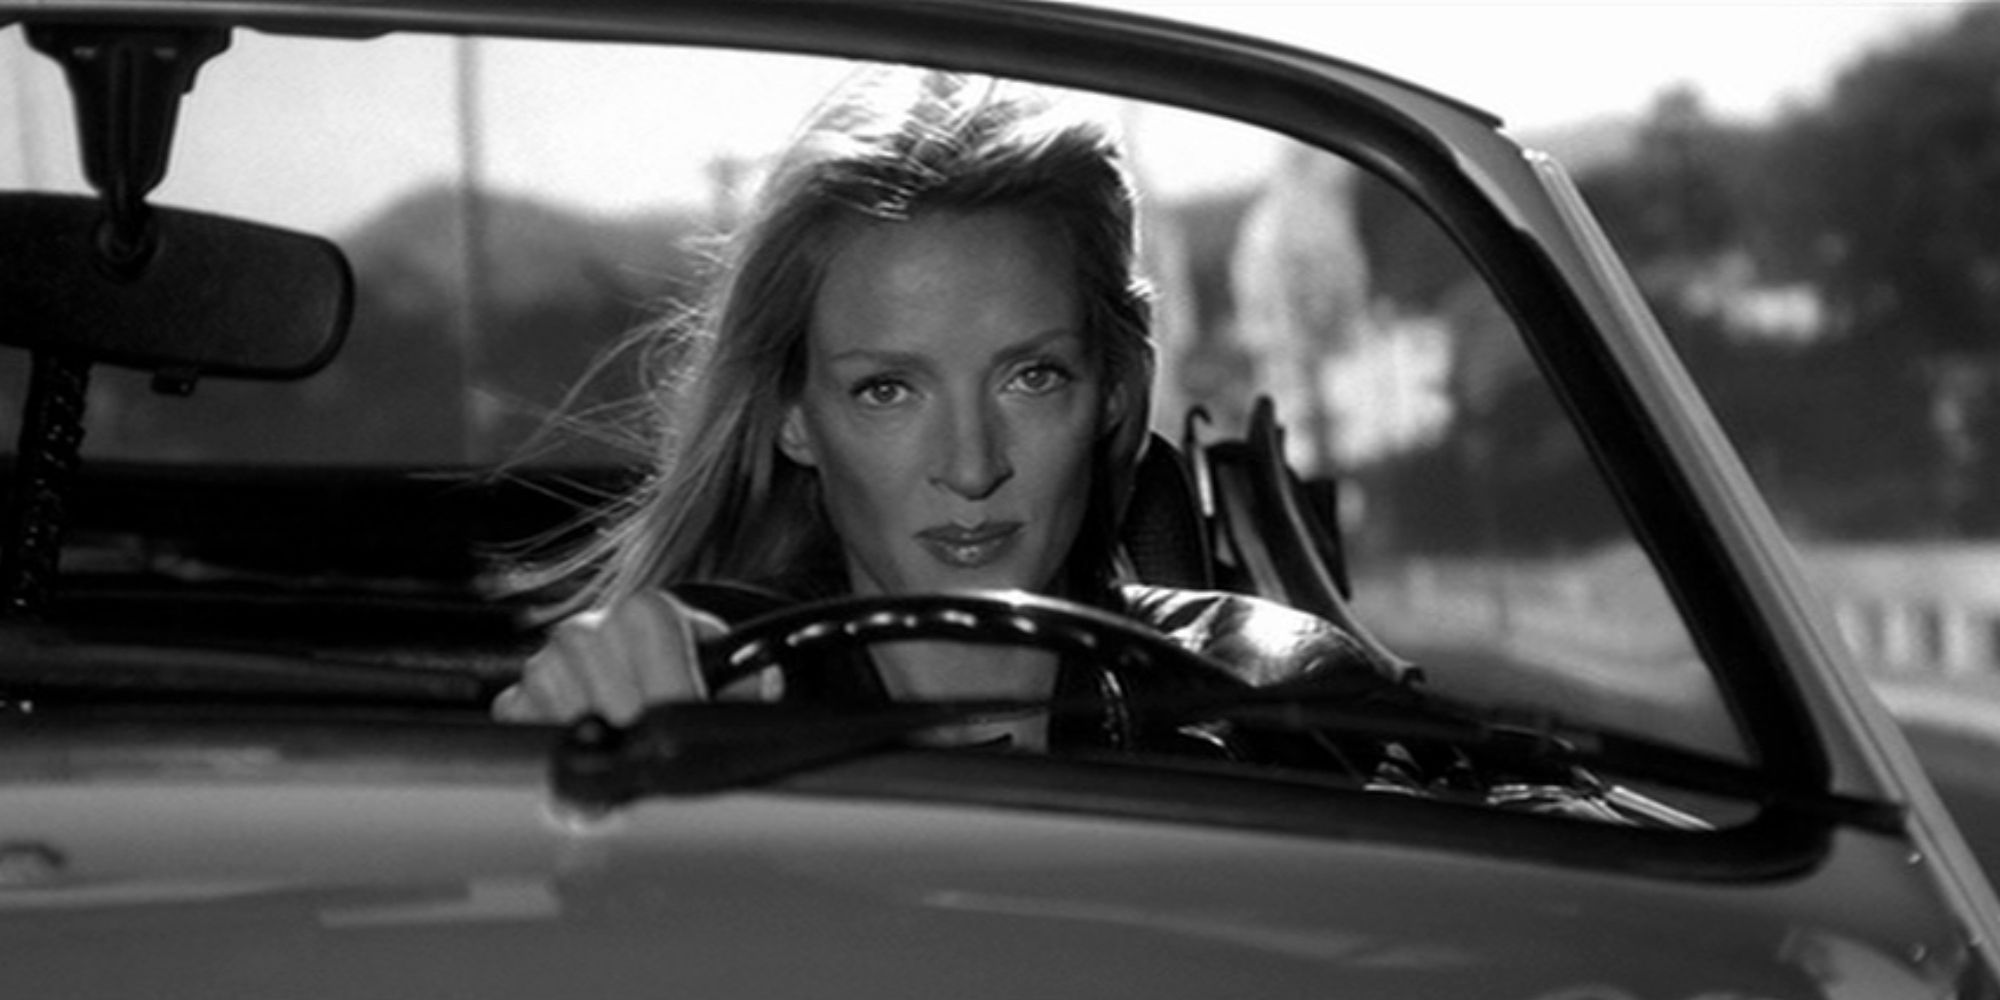 Uma Thurman as The Bride driving a car and smiling softly in black and white